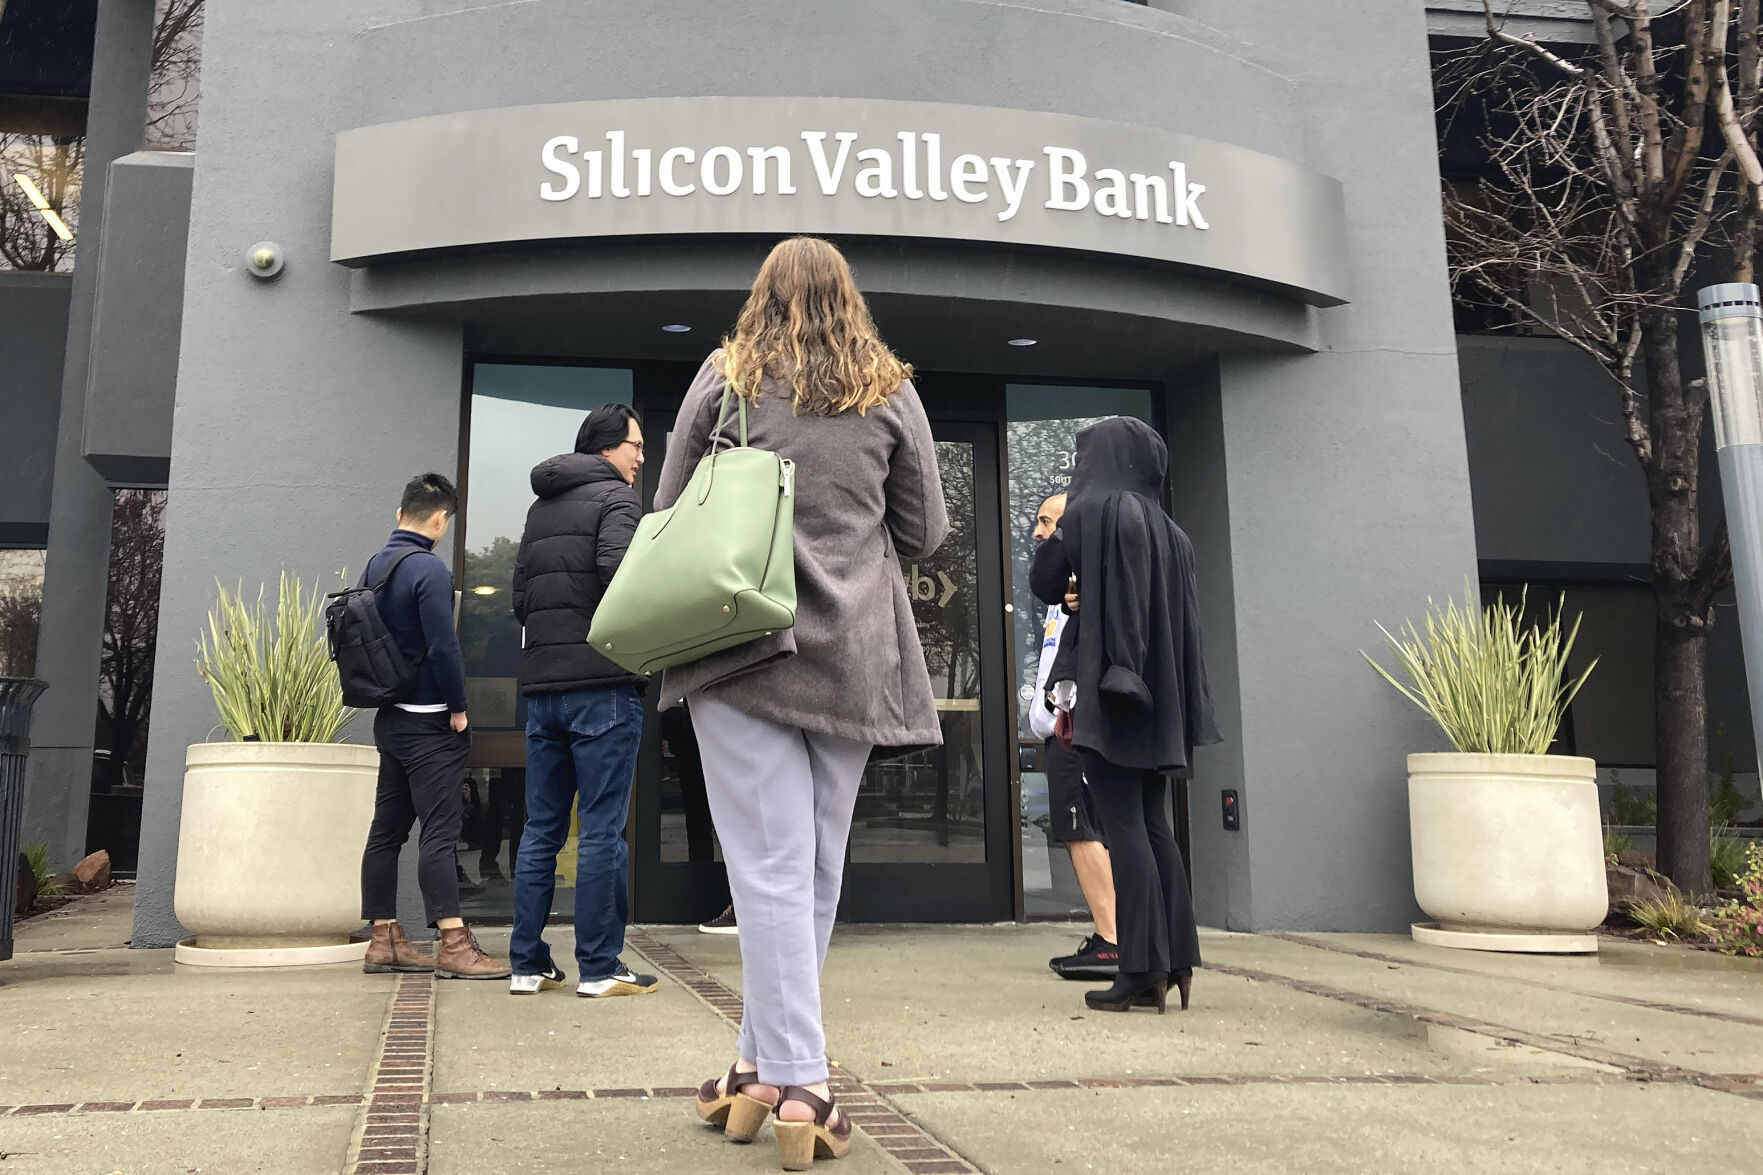 <p>File - People stand outside of an entrance to Silicon Valley Bank in Santa Clara, Calif., Friday, March 10, 2023. The collapse of Silicon Valley Bank and Signature Bank, and the bailout of First Republic, was a jolt for small businesses of all stripes, spurring many to scrutinize their banking services and mull whether or not they should make changes to ensure their money is safe. (AP Photo/Jeff Chiu, File)</p>   PHOTO CREDIT: Jeff Chiu 